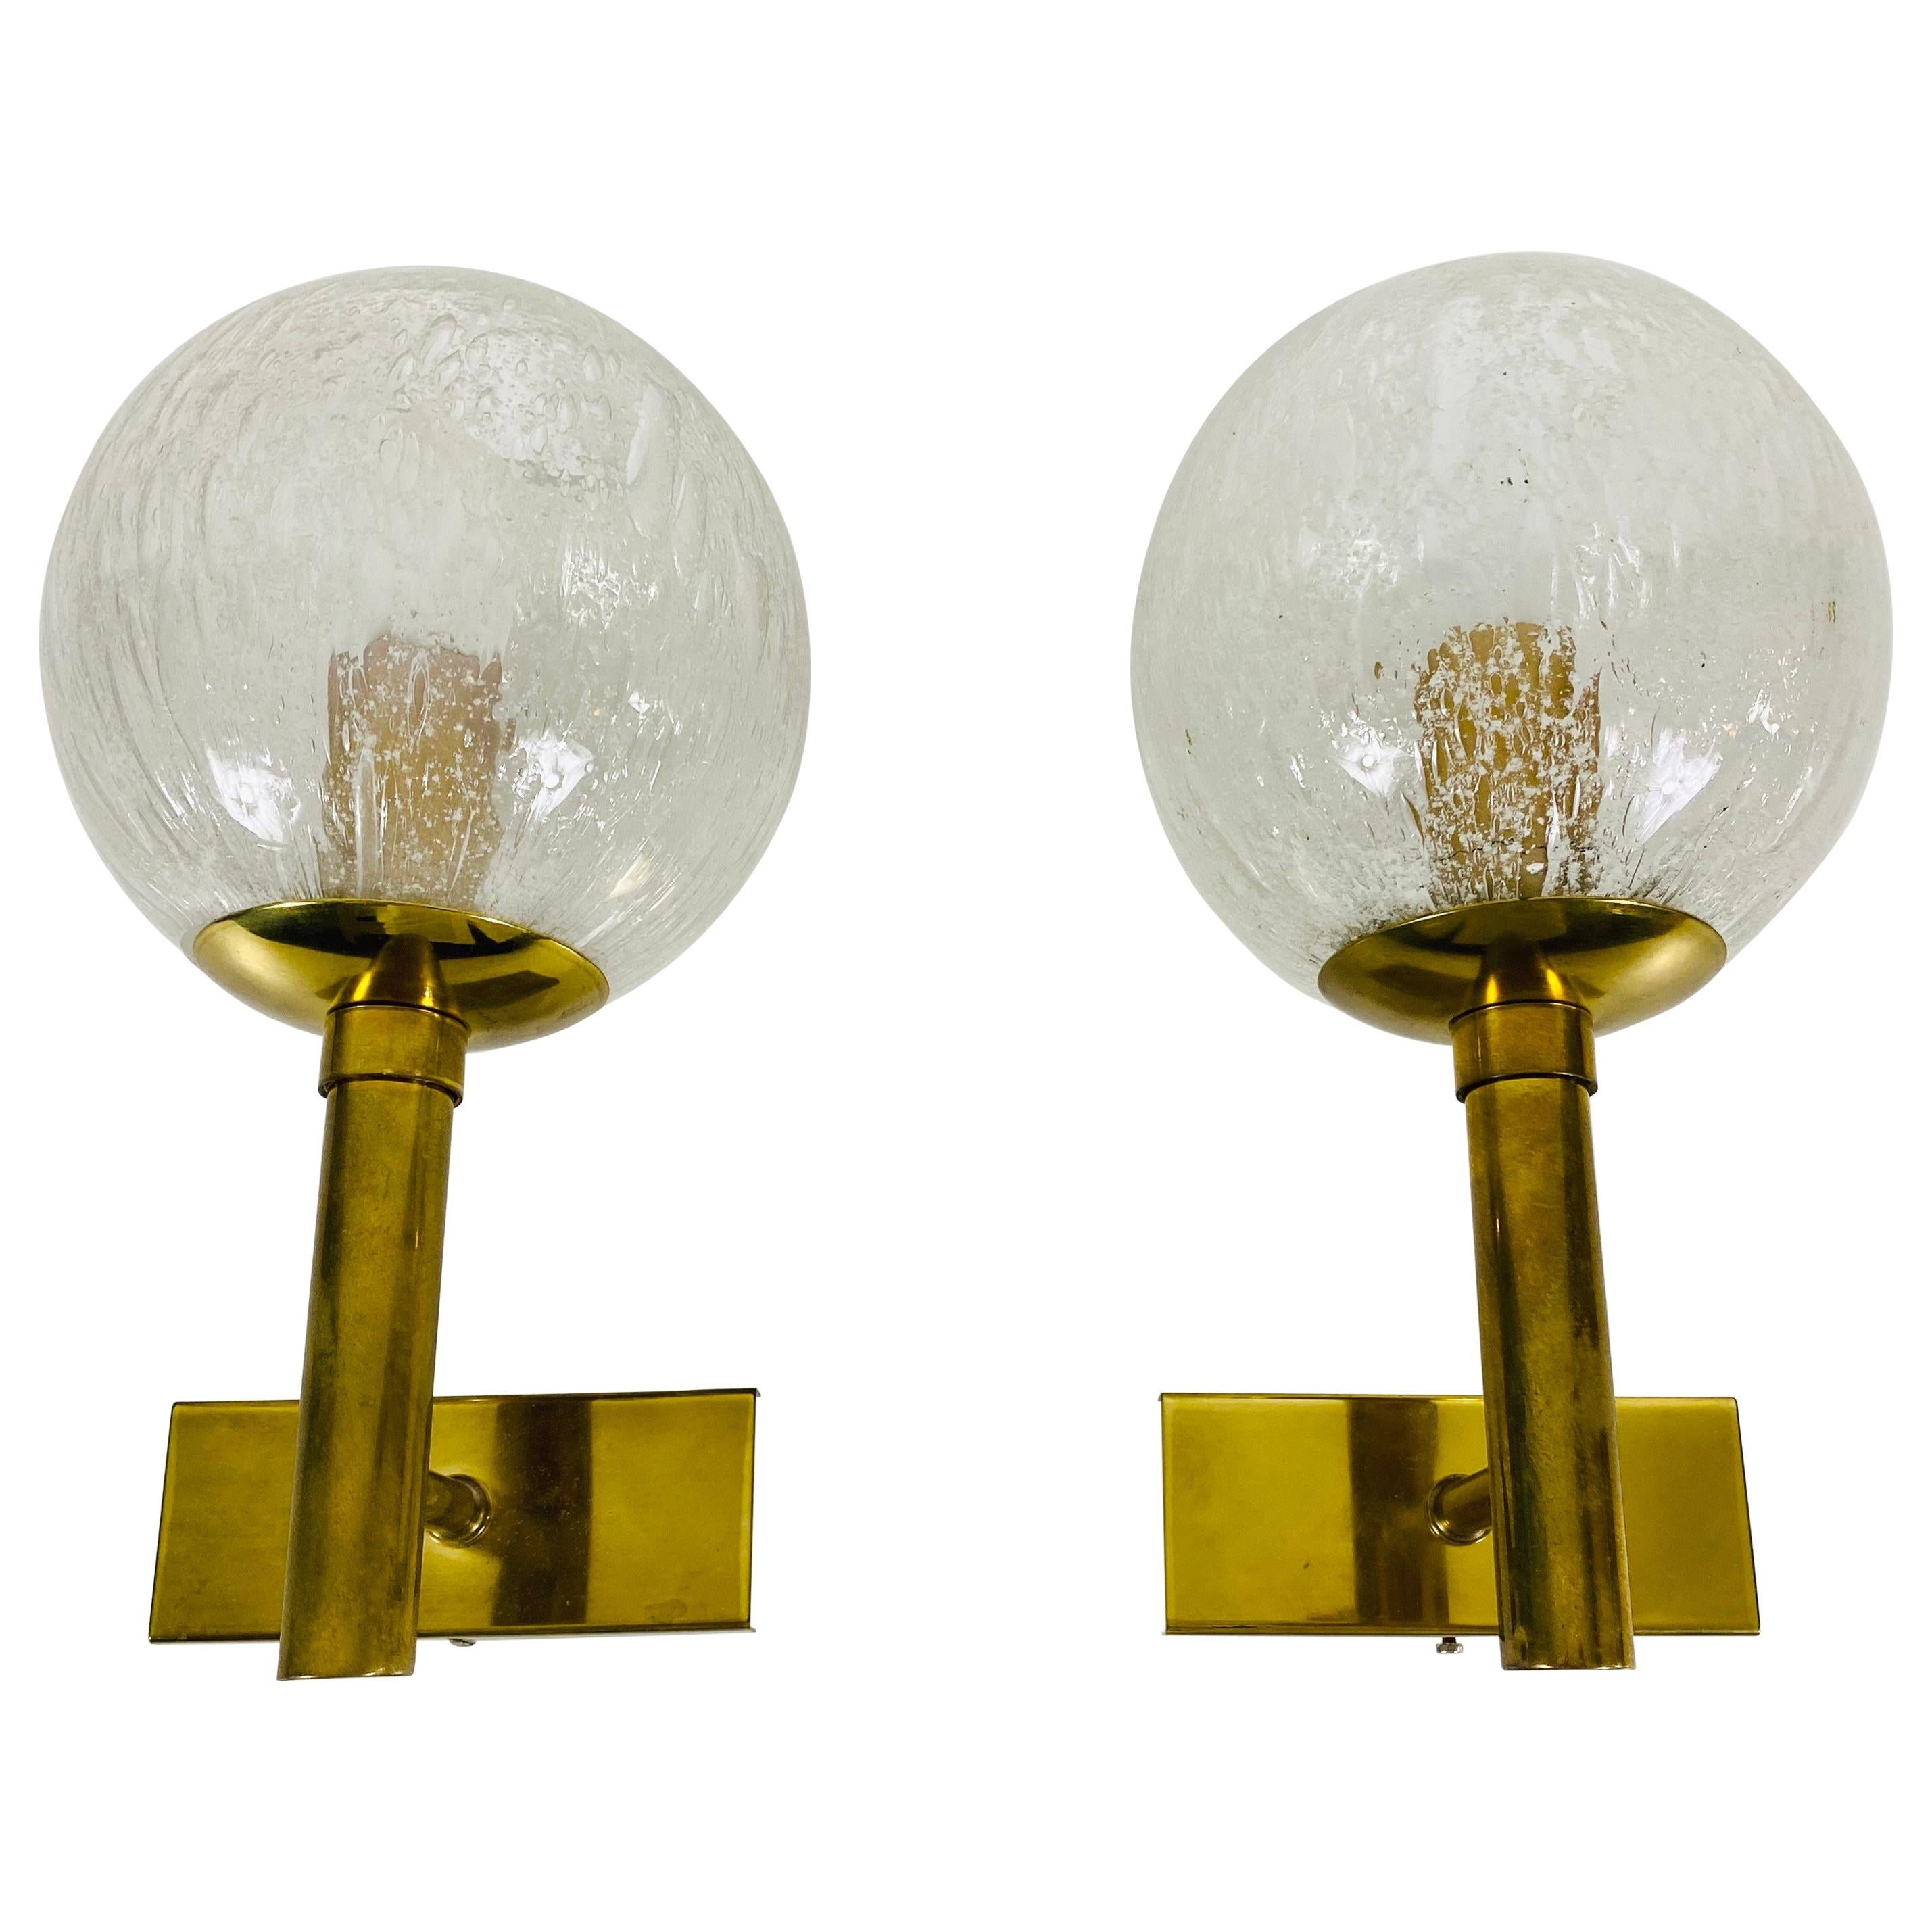 Pair of Hillebrand Brass and Glass Wall Lamps, Germany, 1960s For Sale